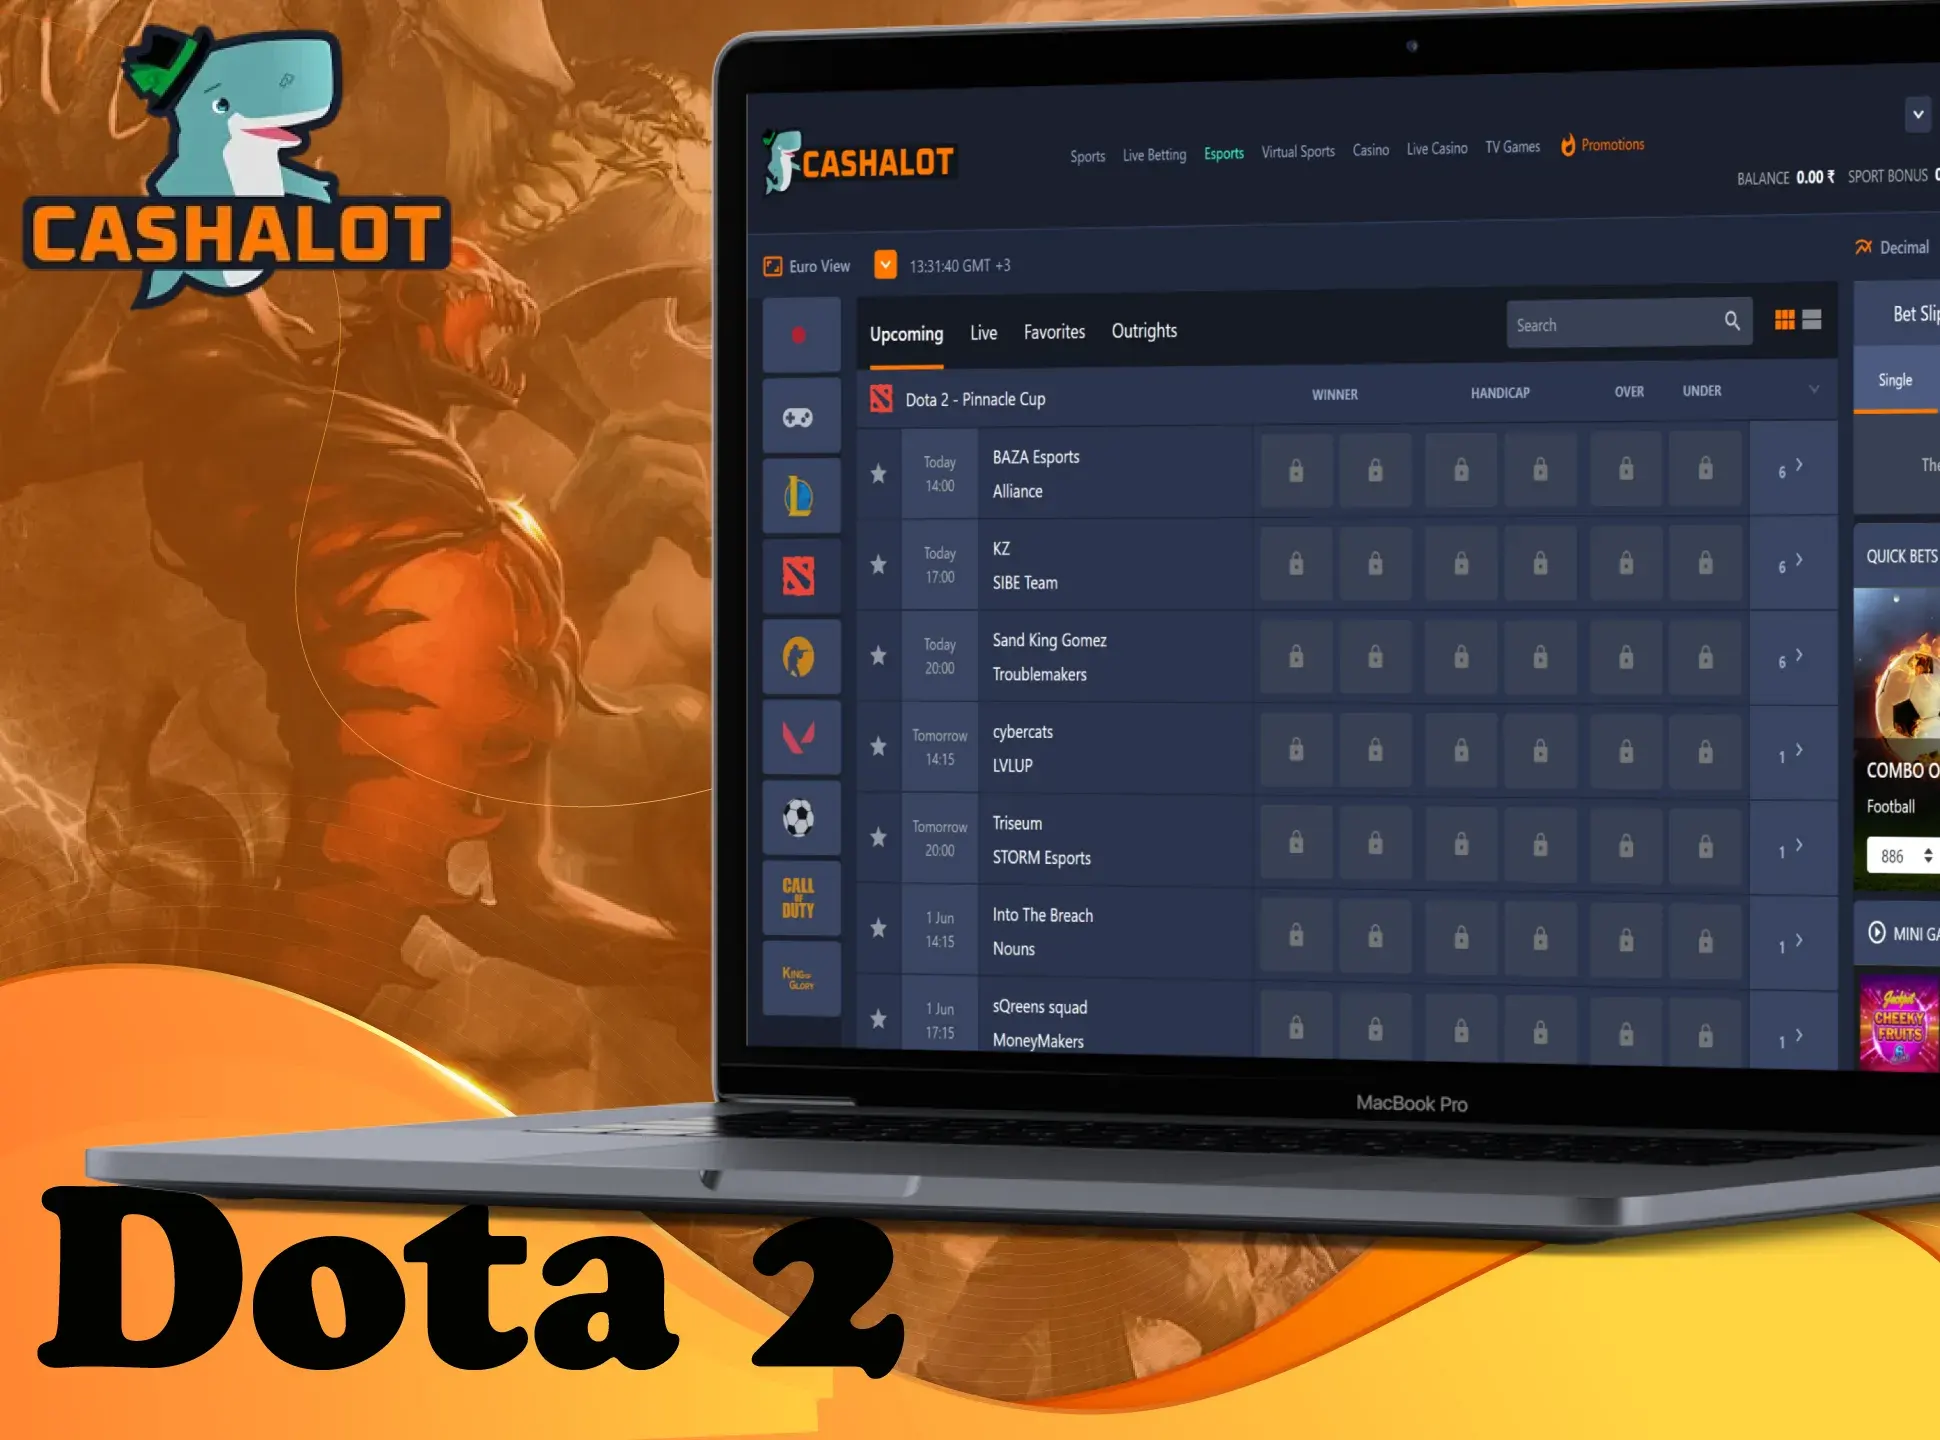 Bet on matches of the biggest Dota 2 tournaments at Cashalot.